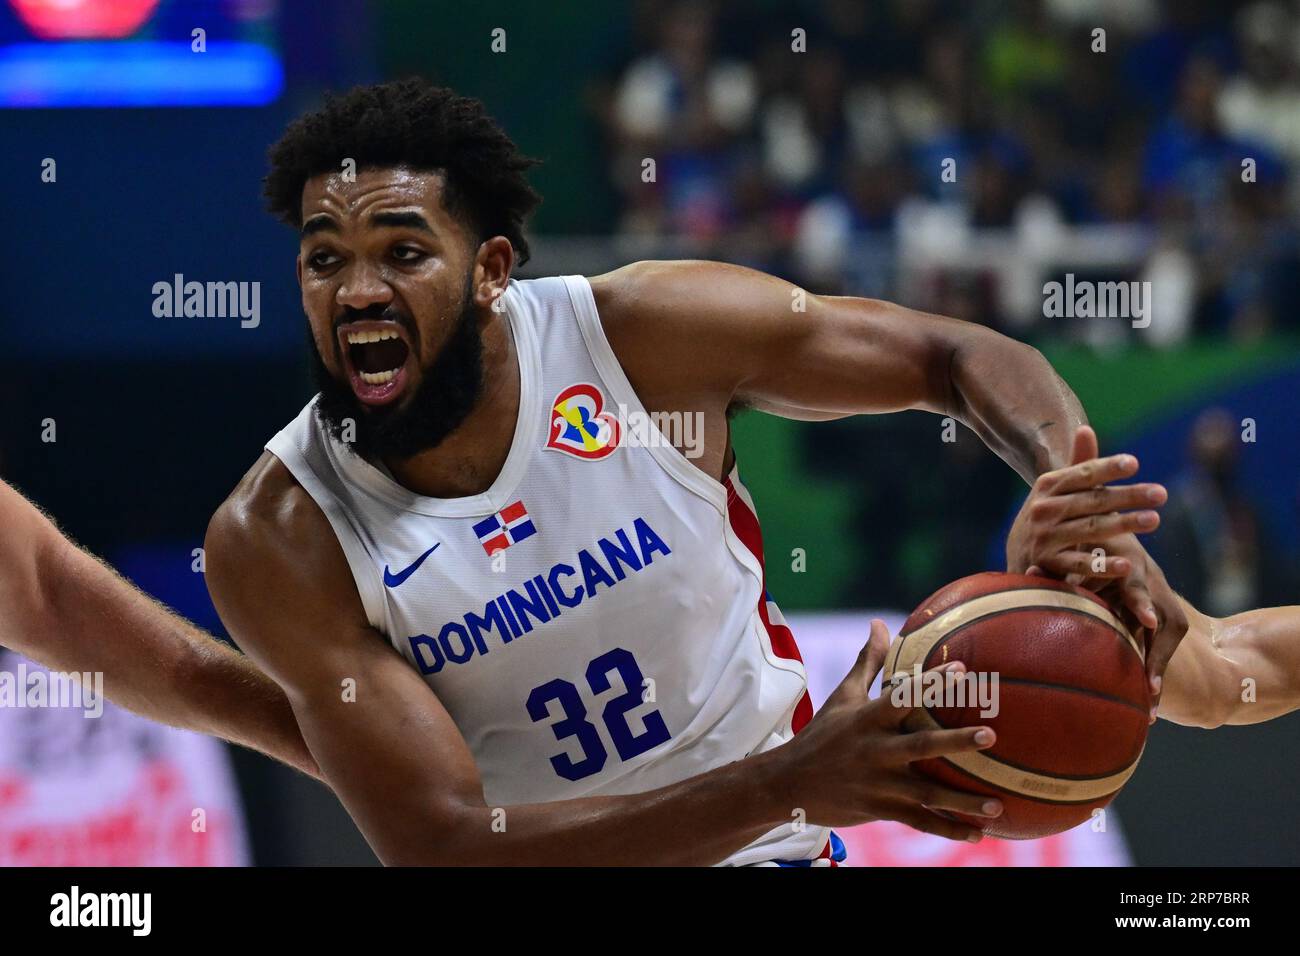 Why is Karl-Anthony Towns playing for Dominican Republic at 2023